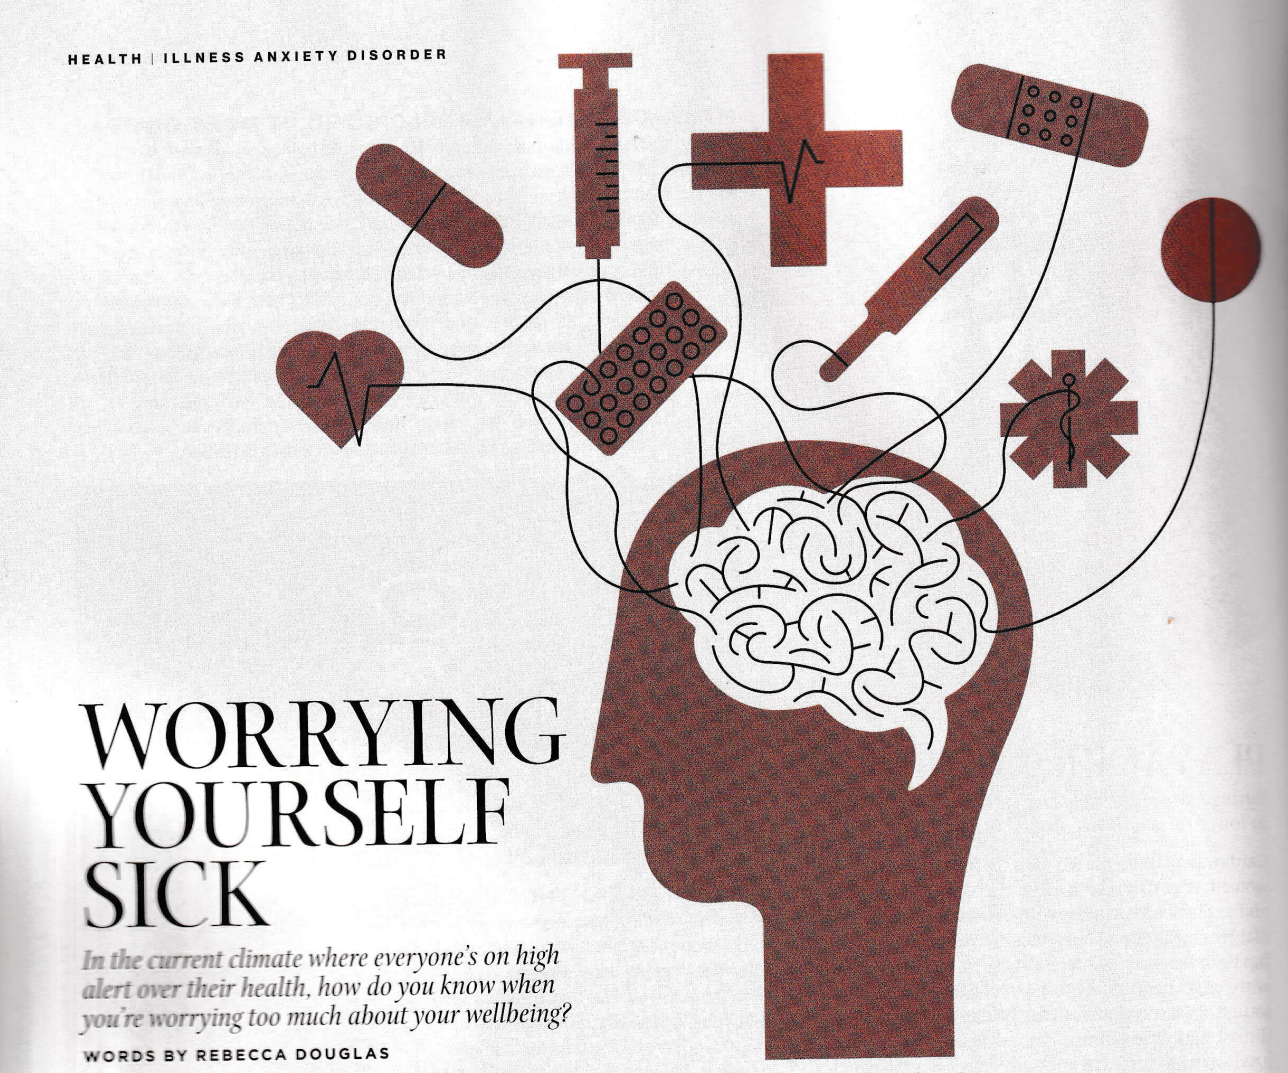 Worrying yourself sick – Dr Frank Chow in MiNDFOOD